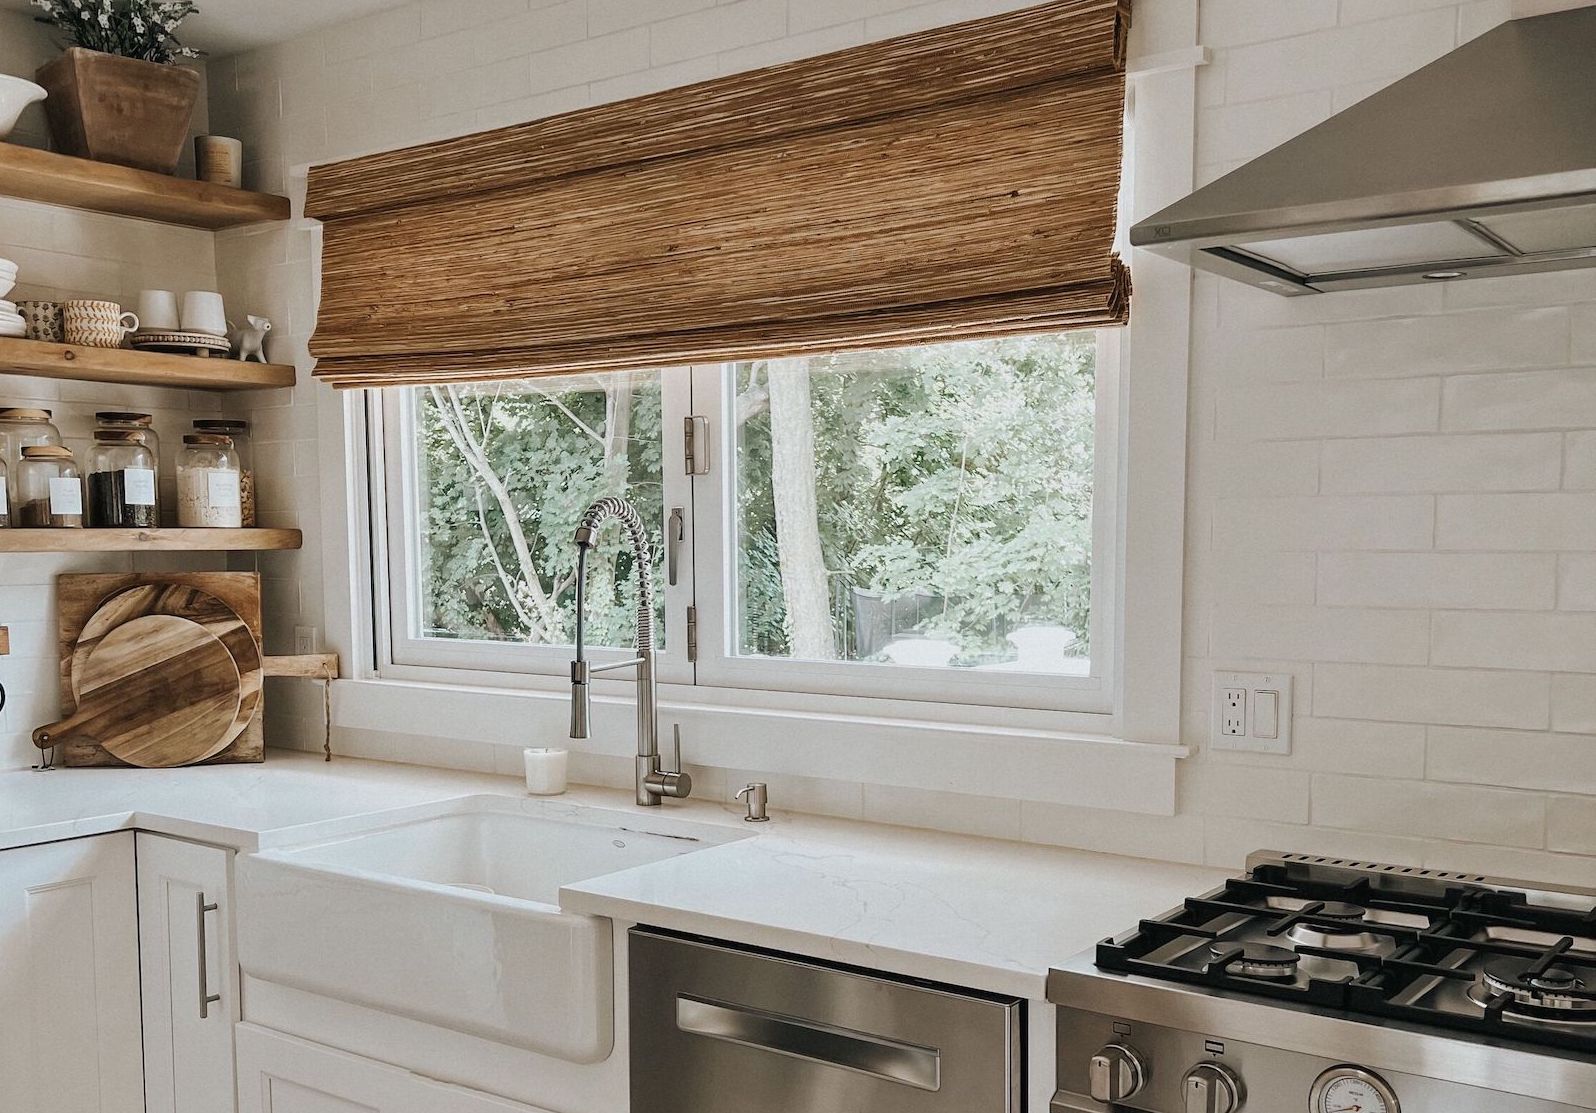 Rustic woven wood shades cover a large window above a large farmhouse-style sink in a modern kitchen.